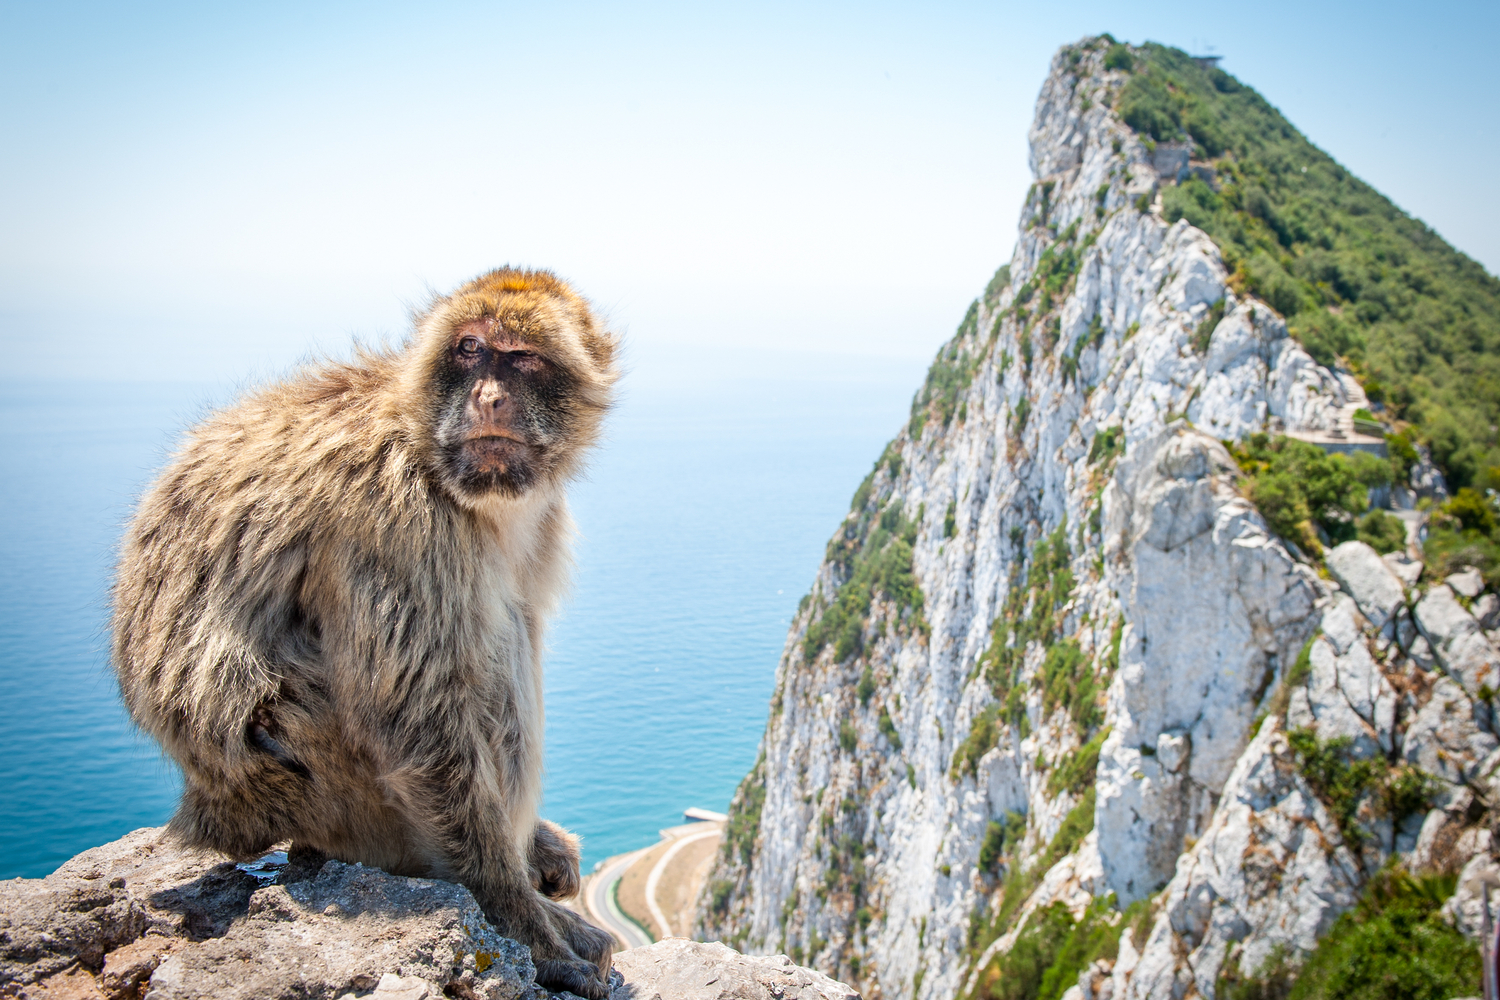 It’s-tough-getting-approved-in-gibraltar,-says-green-lighted-crypto-derivatives-exchange